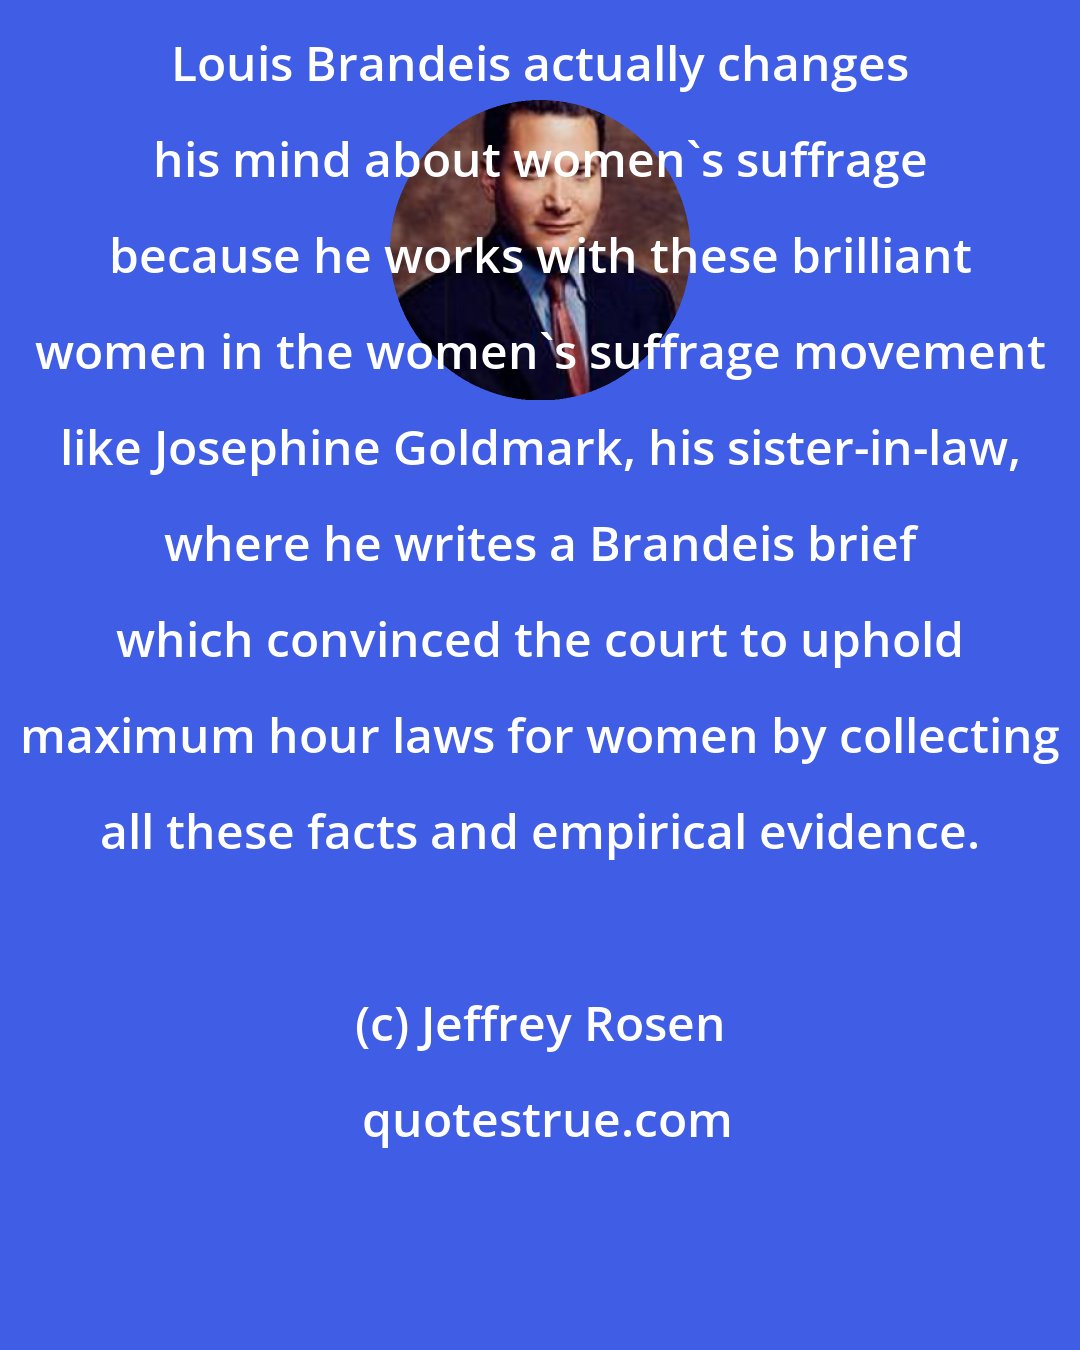 Jeffrey Rosen: Louis Brandeis actually changes his mind about women's suffrage because he works with these brilliant women in the women's suffrage movement like Josephine Goldmark, his sister-in-law, where he writes a Brandeis brief which convinced the court to uphold maximum hour laws for women by collecting all these facts and empirical evidence.